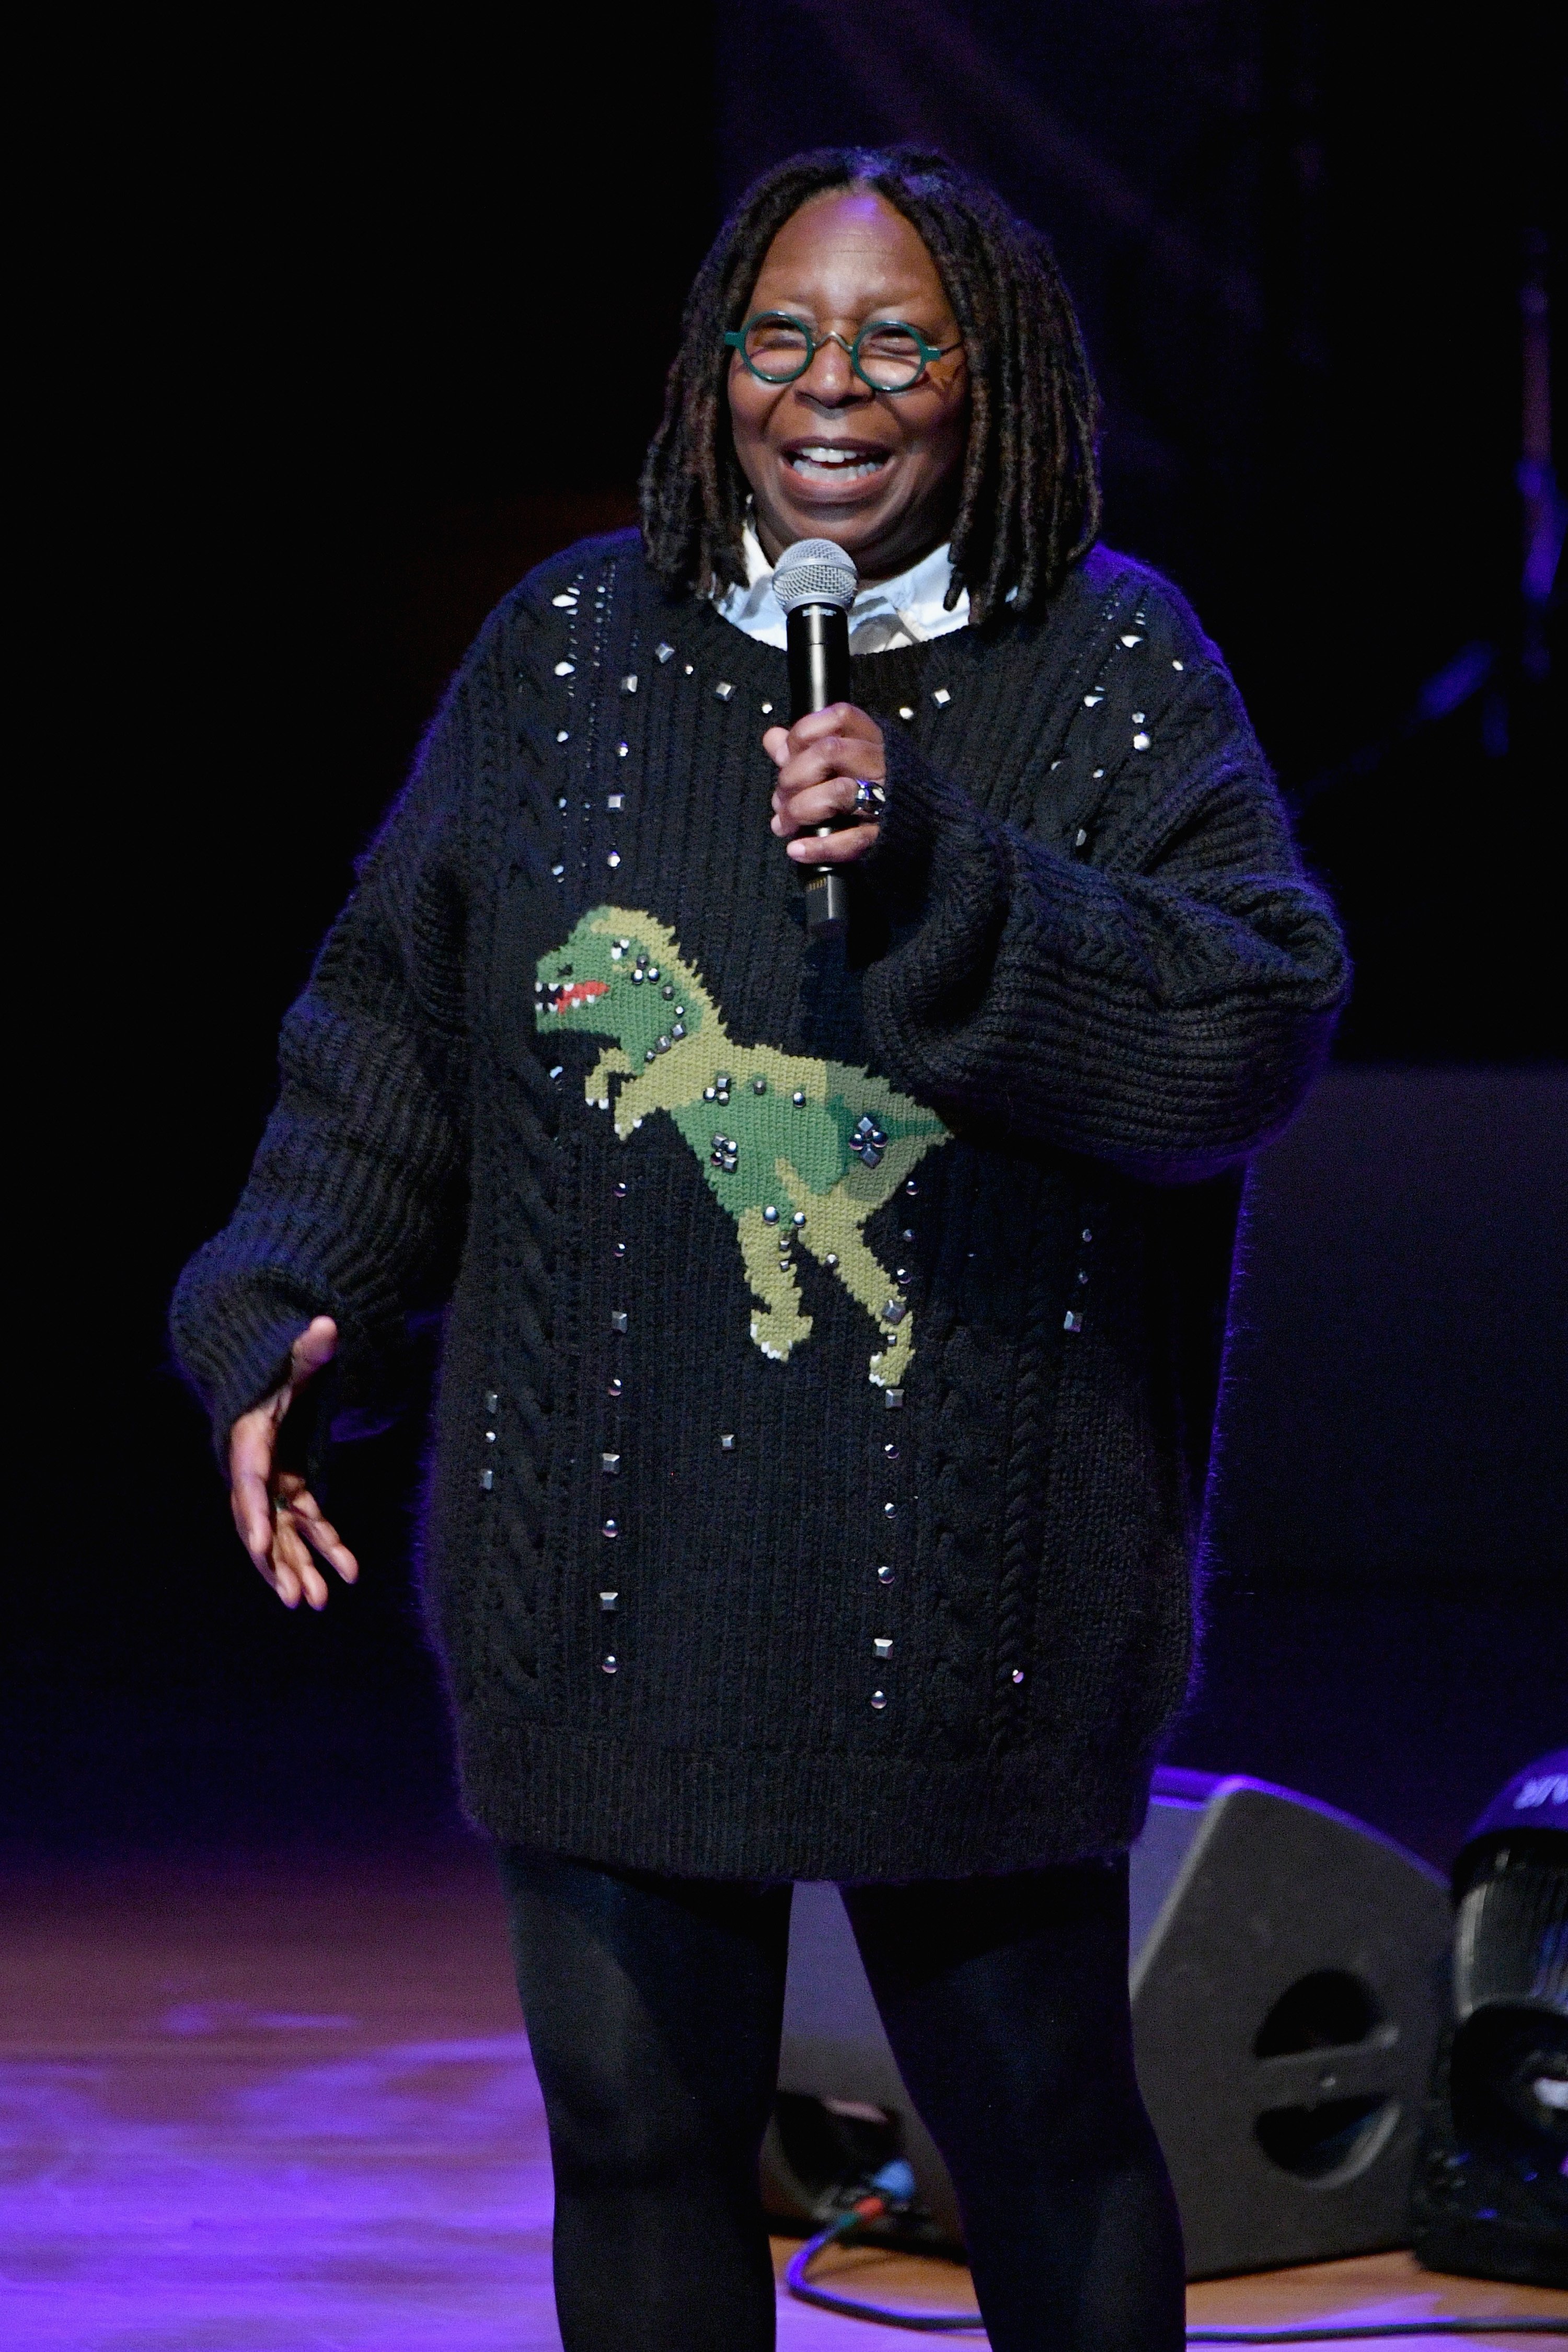 Whoopi Goldberg at the Lincoln Center Fashion Gala - An Evening Honoring Coach at Lincoln Center Theater on Nov. 29, 2018 in New York City. |Photo: Getty Images